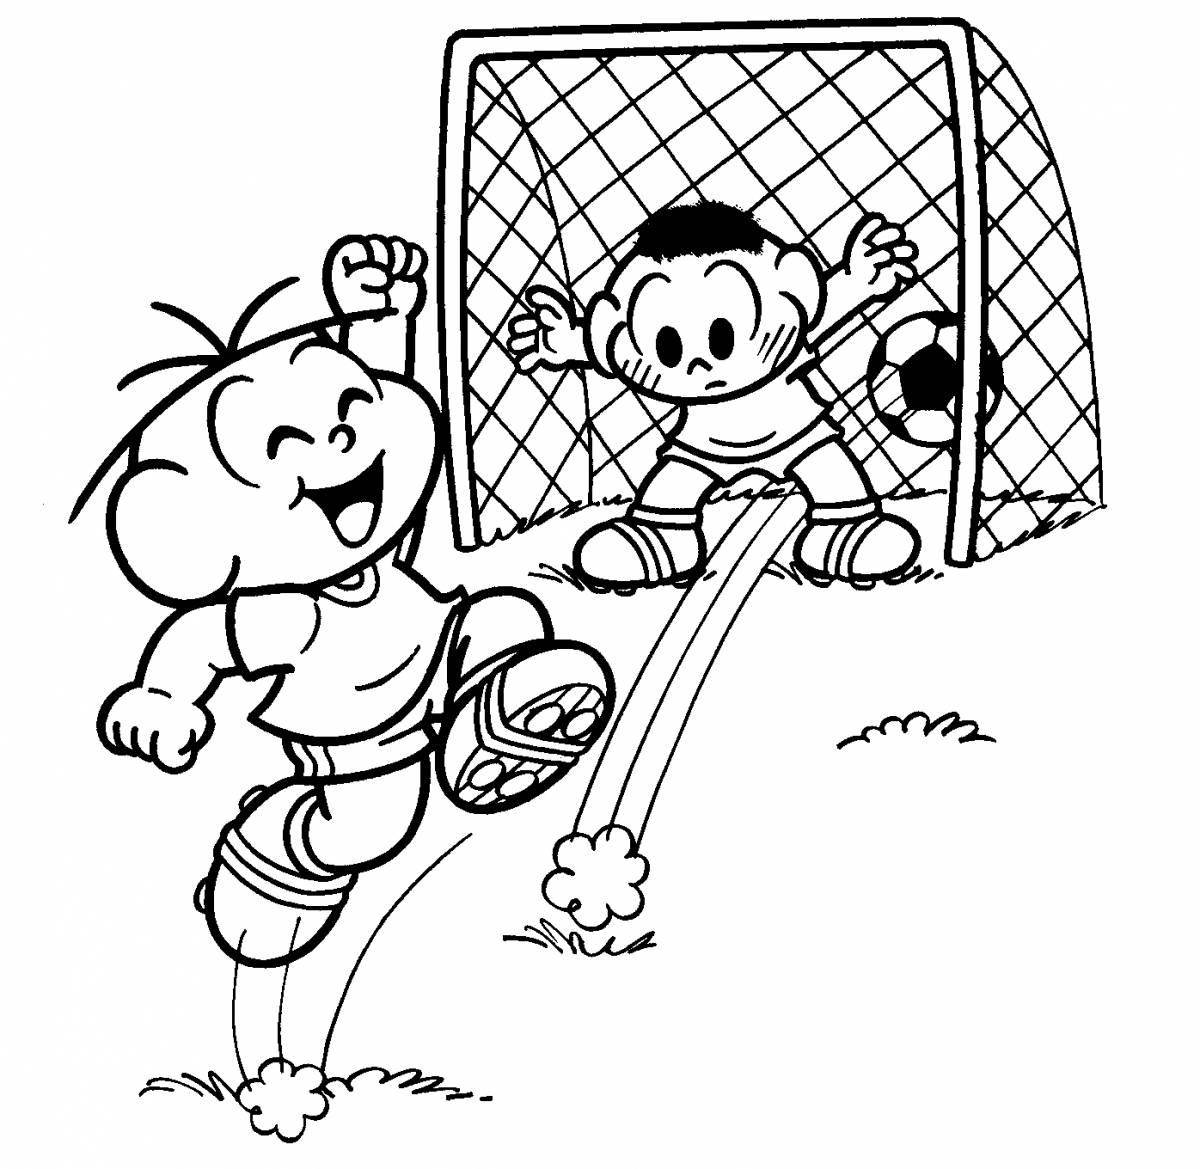 An entertaining football coloring book for kids